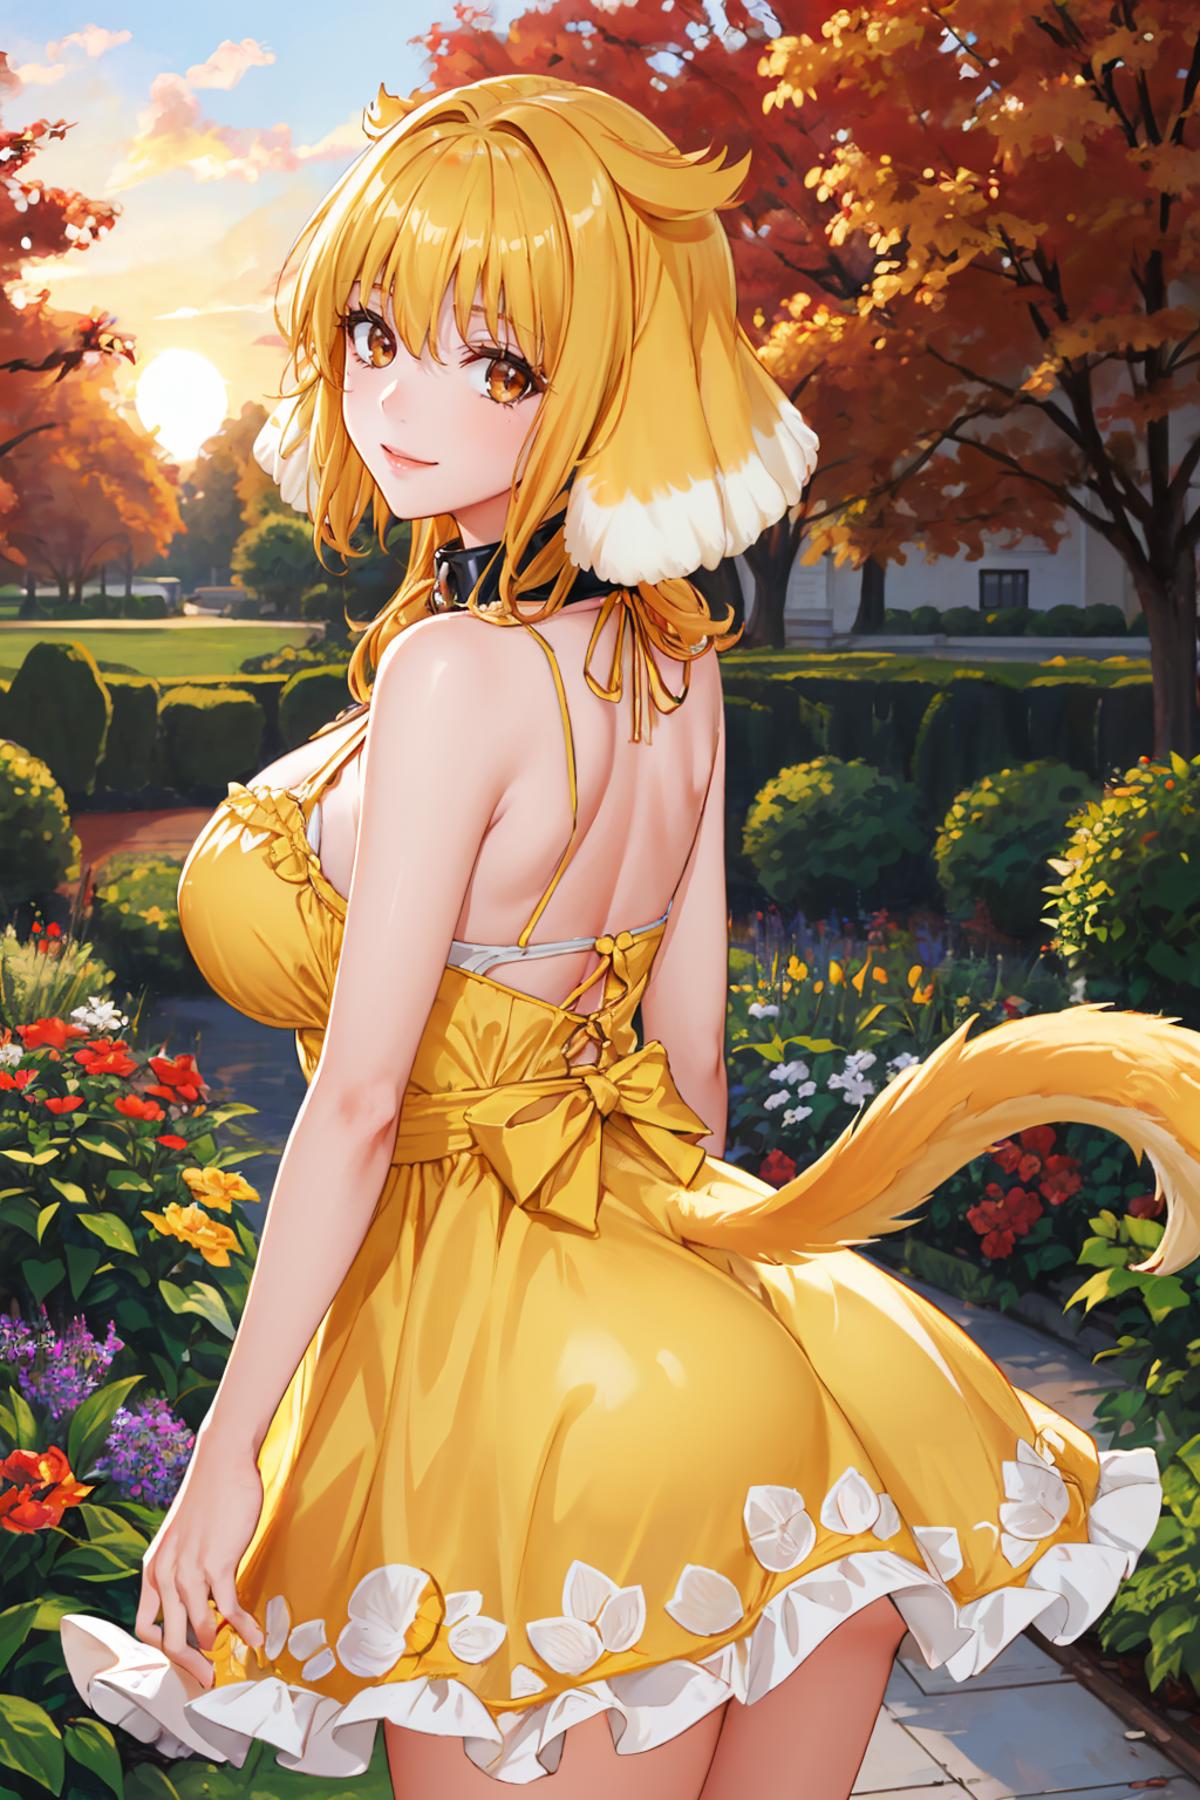 Yellow Sundress - by EDG inspired by ChameleonAI image by novowels